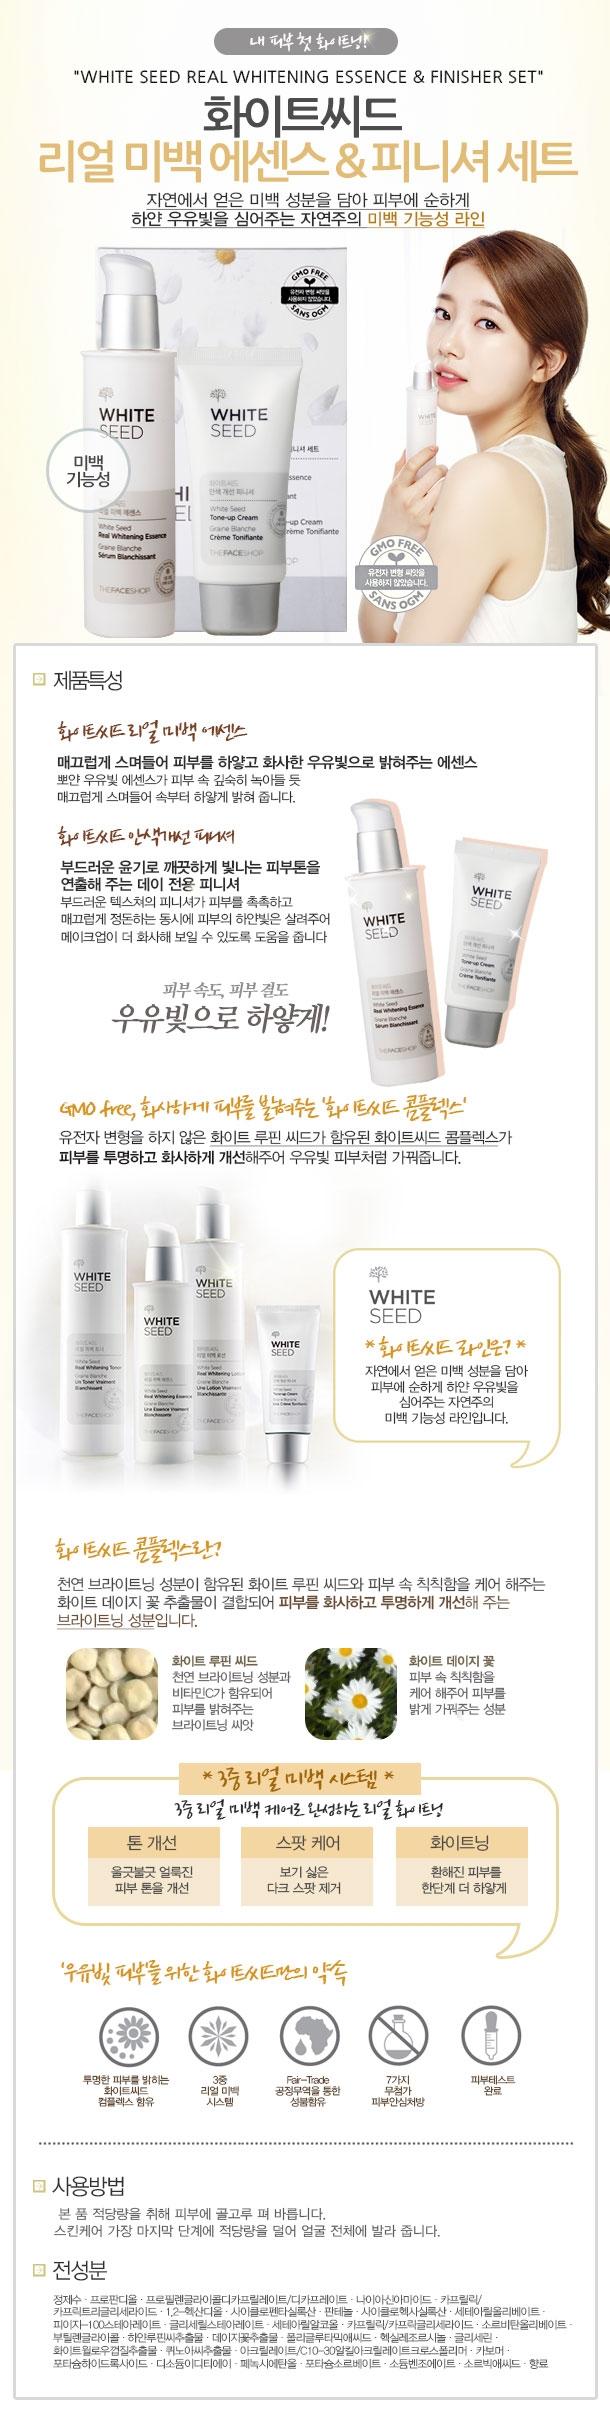 White Seed Real Whitening essence and finisher set